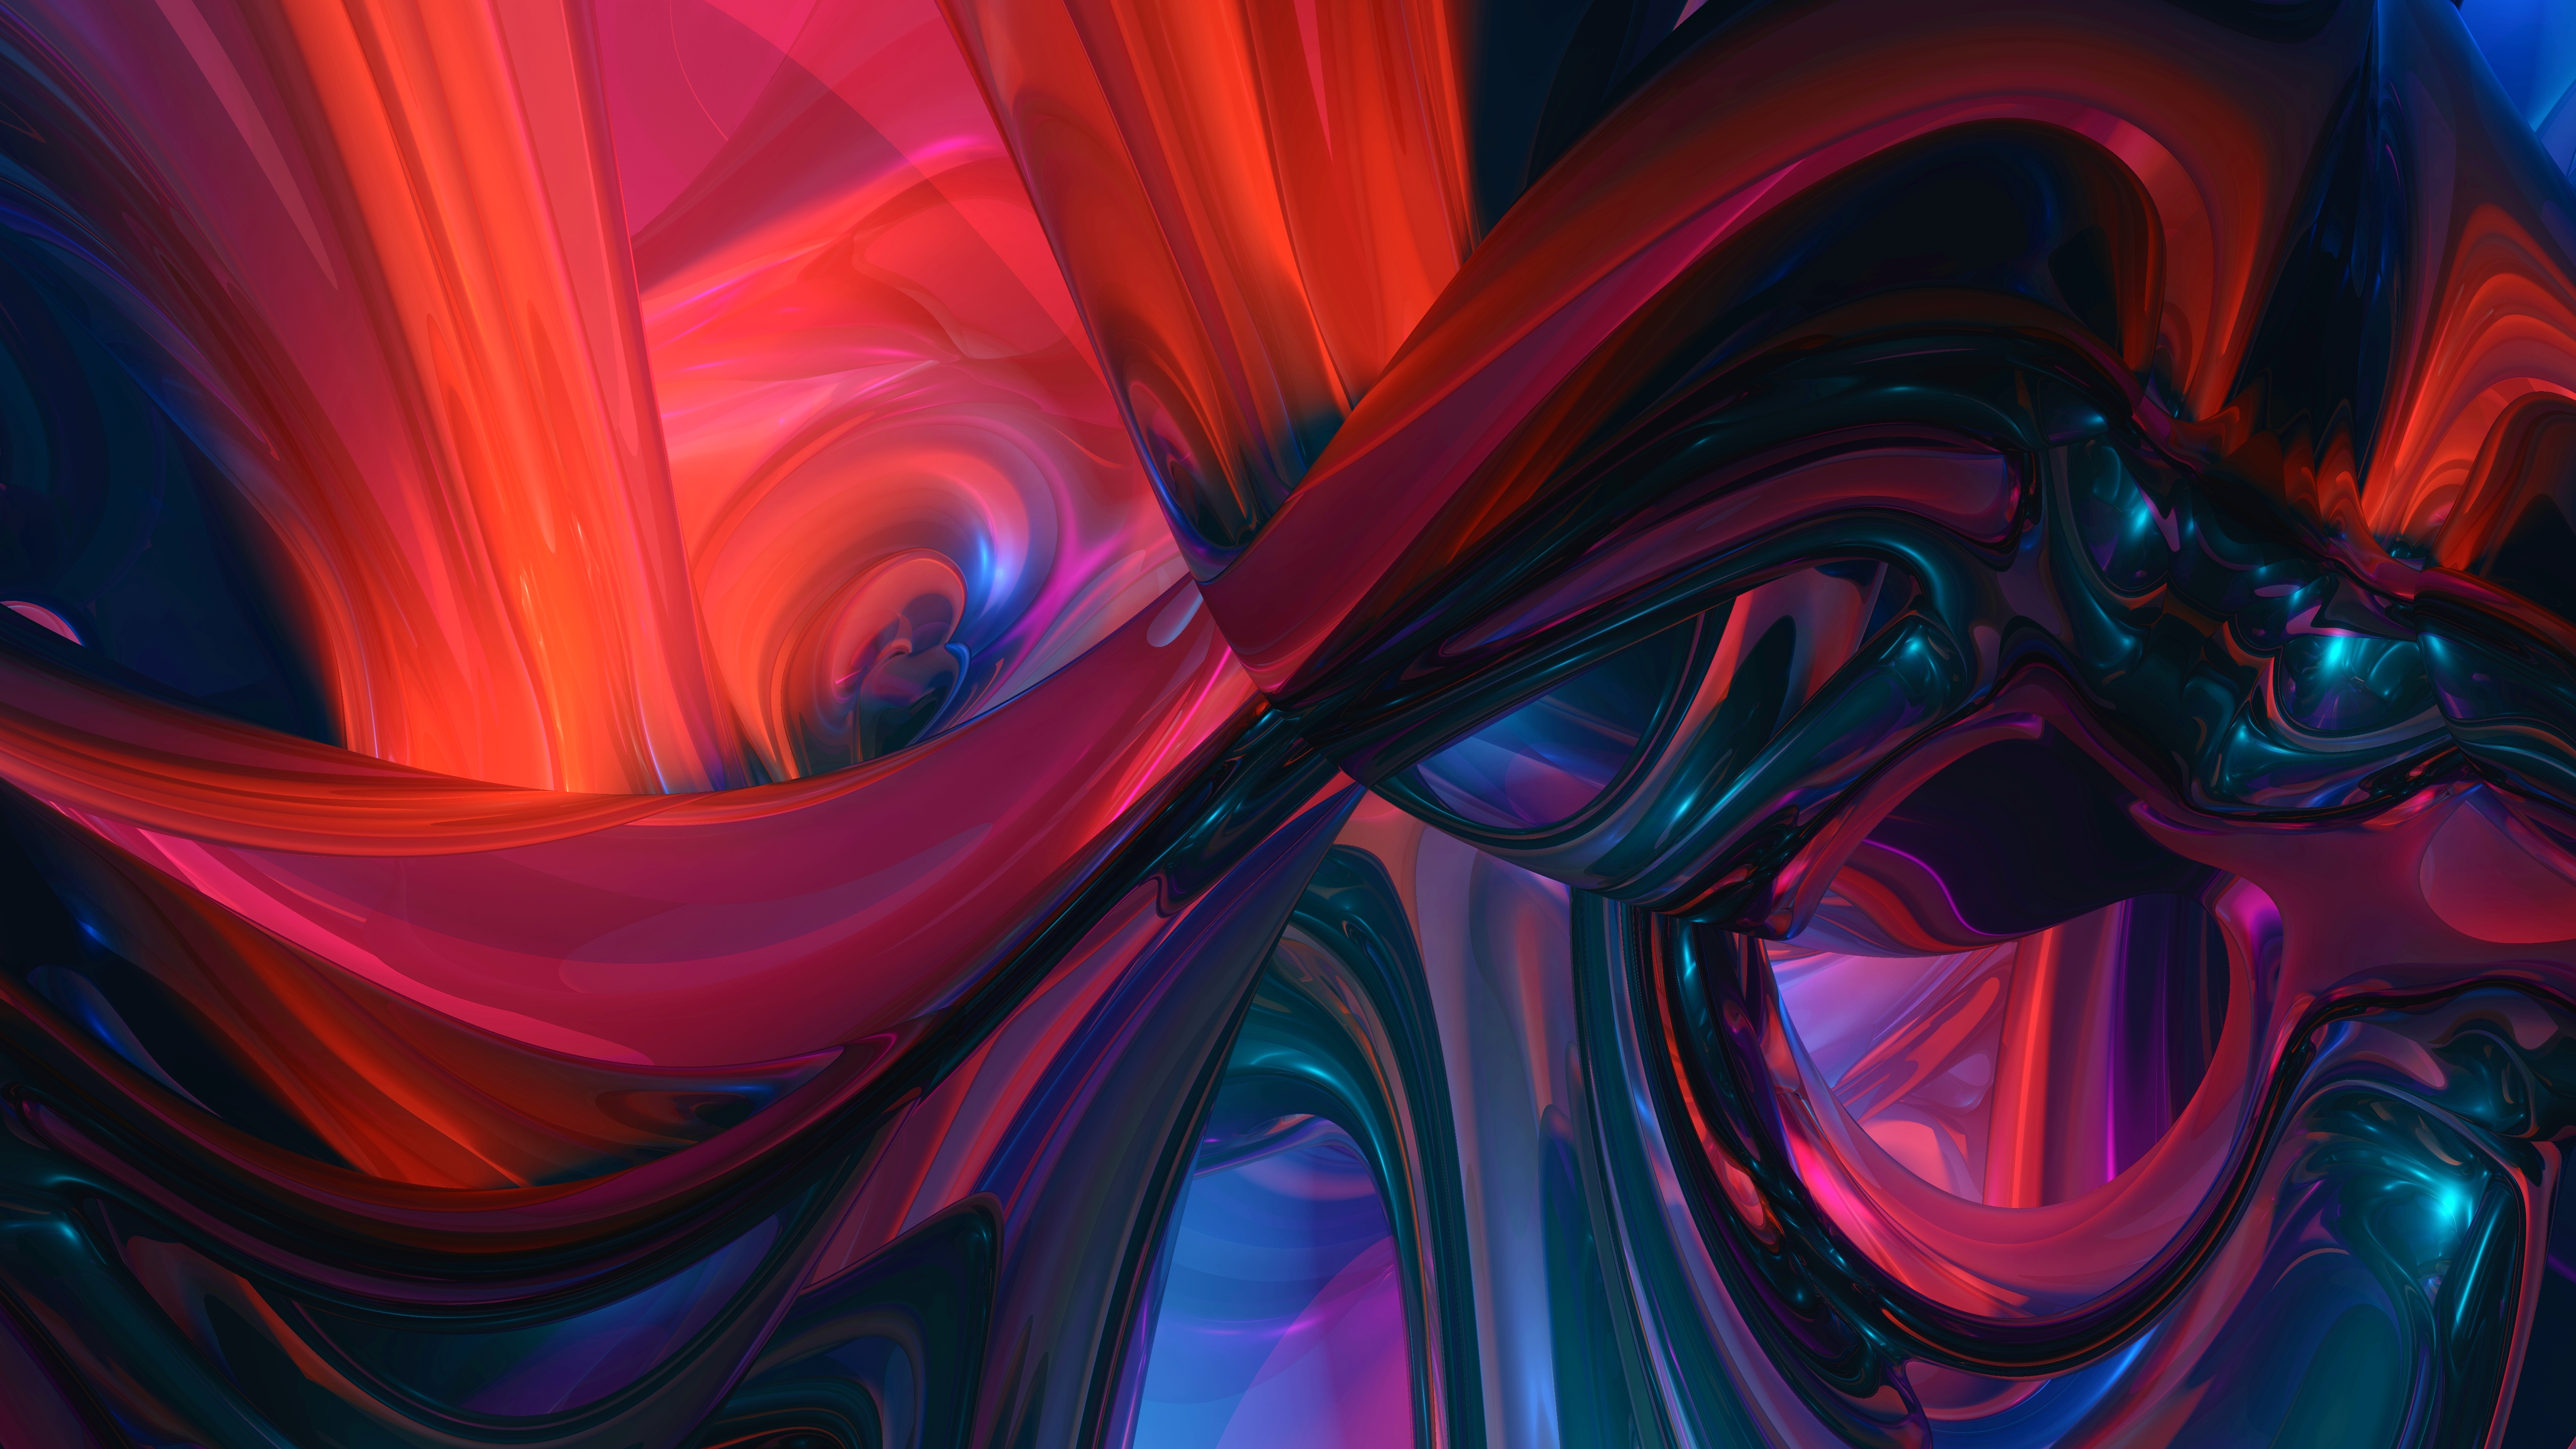 multicolored, confused, fractal, abstract, motley, wavy, intricate